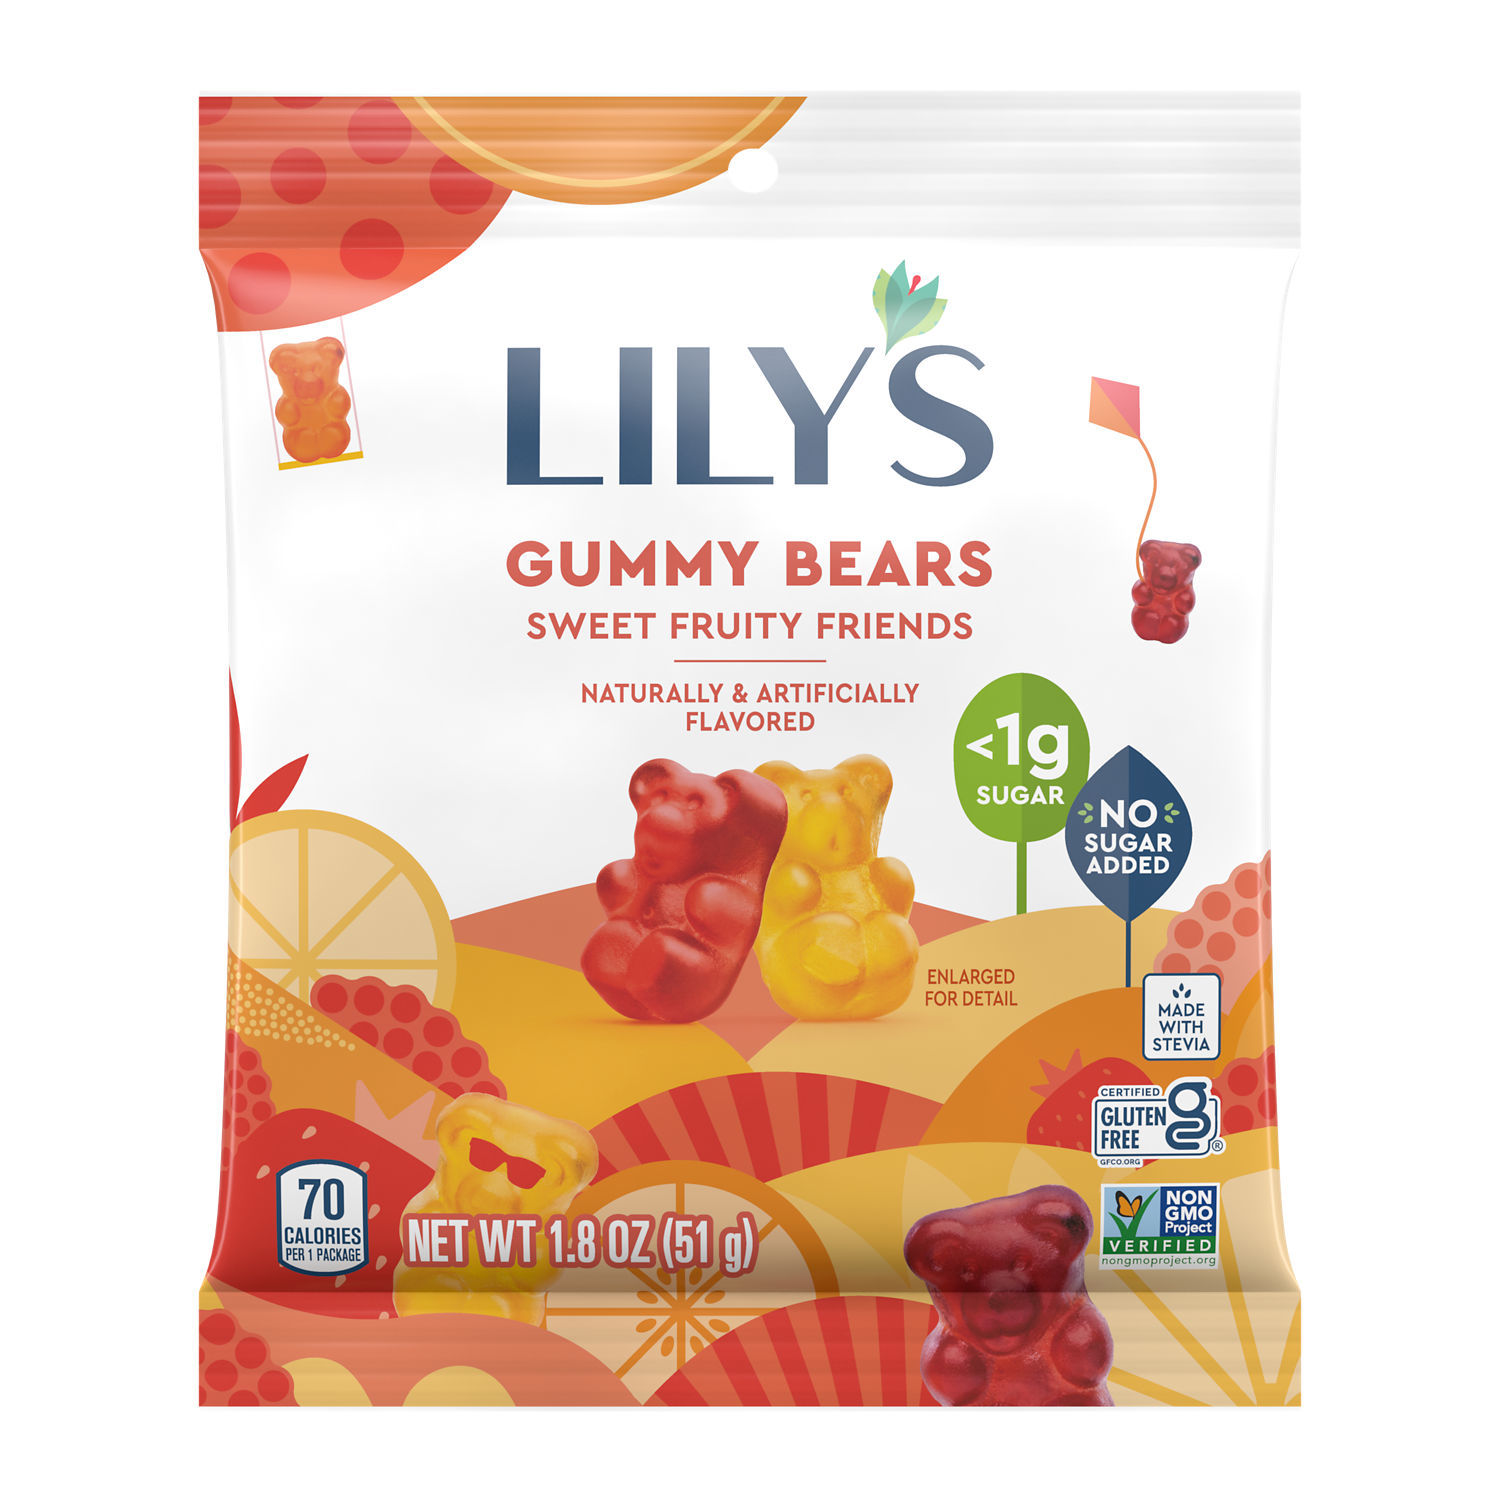 Lily's Assorted Flavored No Sugar Added Gummy Bears, Bag 1.8 oz - image 1 of 7